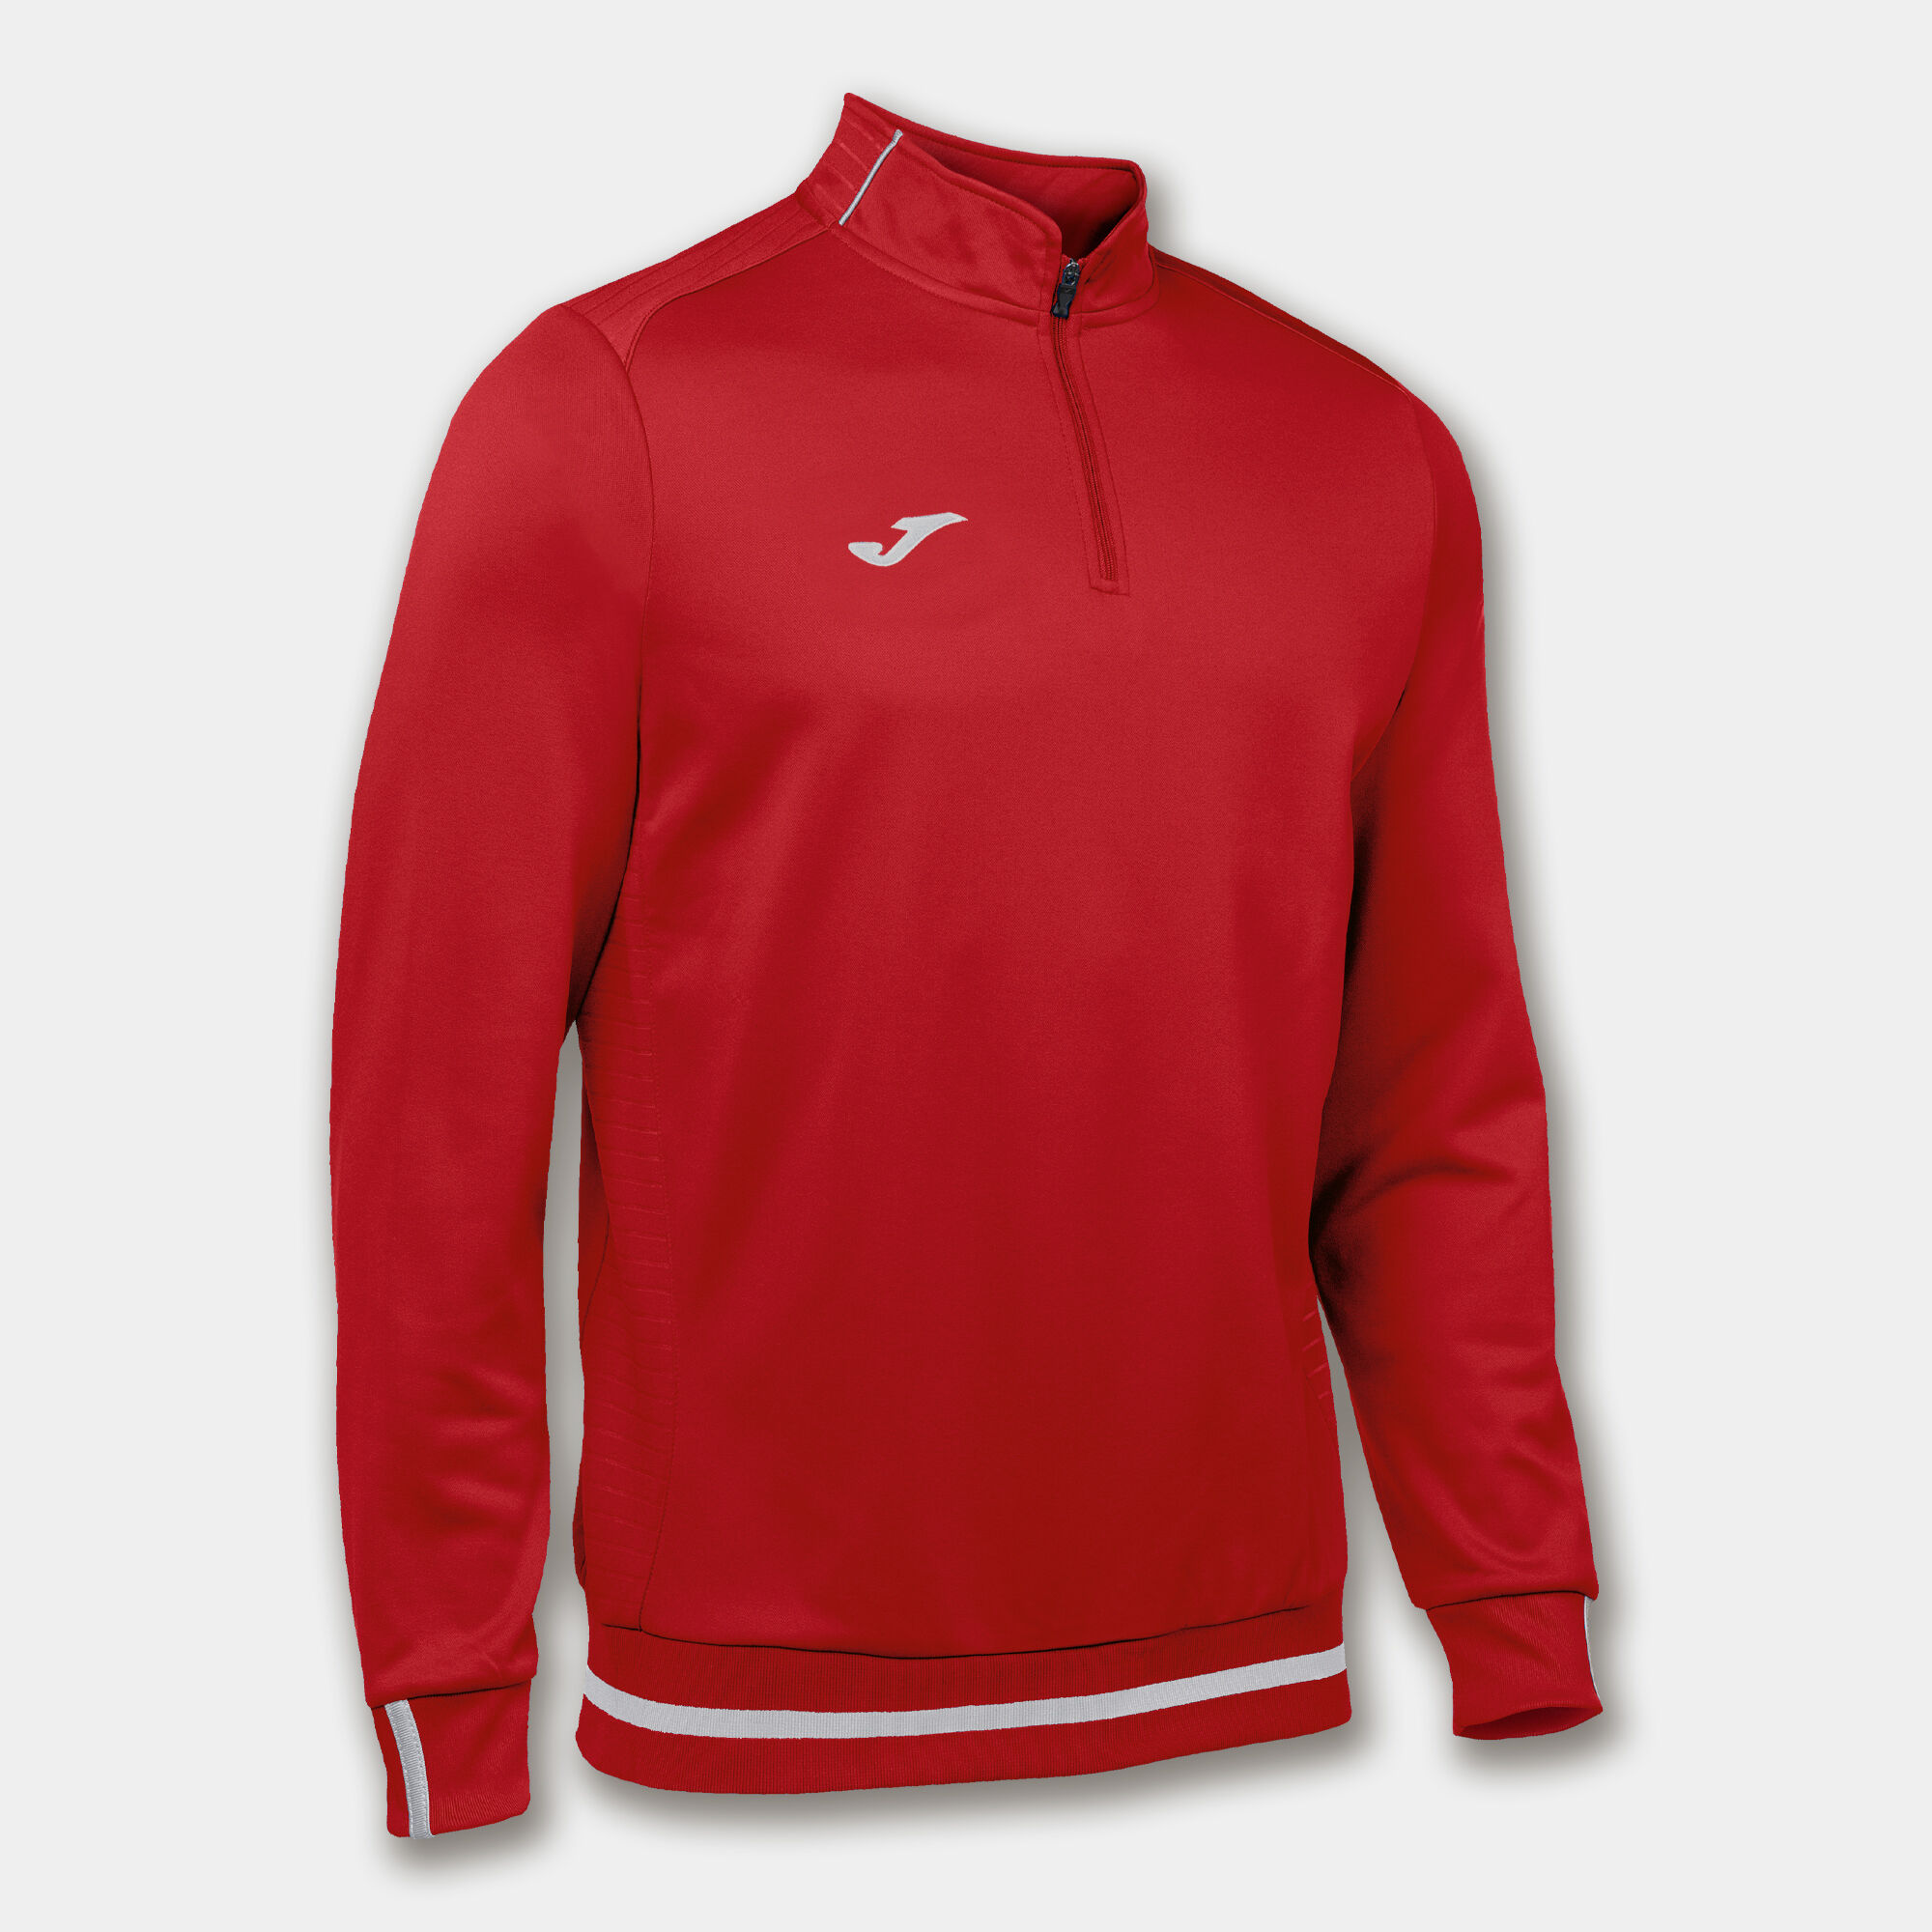 SWEAT-SHIRT HOMME CAMPUS II ROUGE